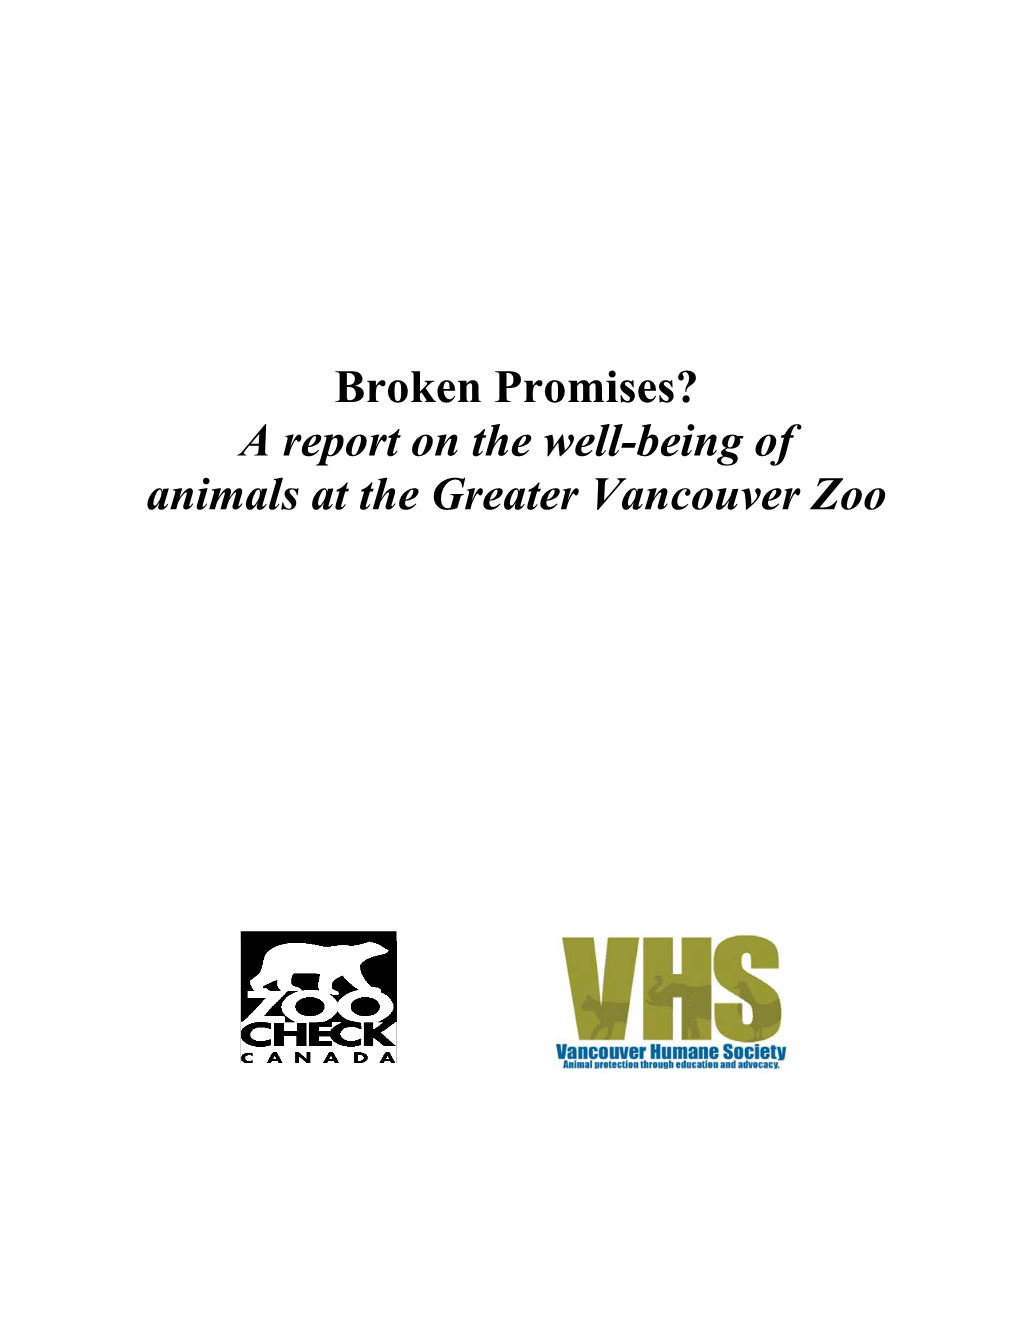 Broken Promises, a Report on the Well-Being of Animals at the Greater